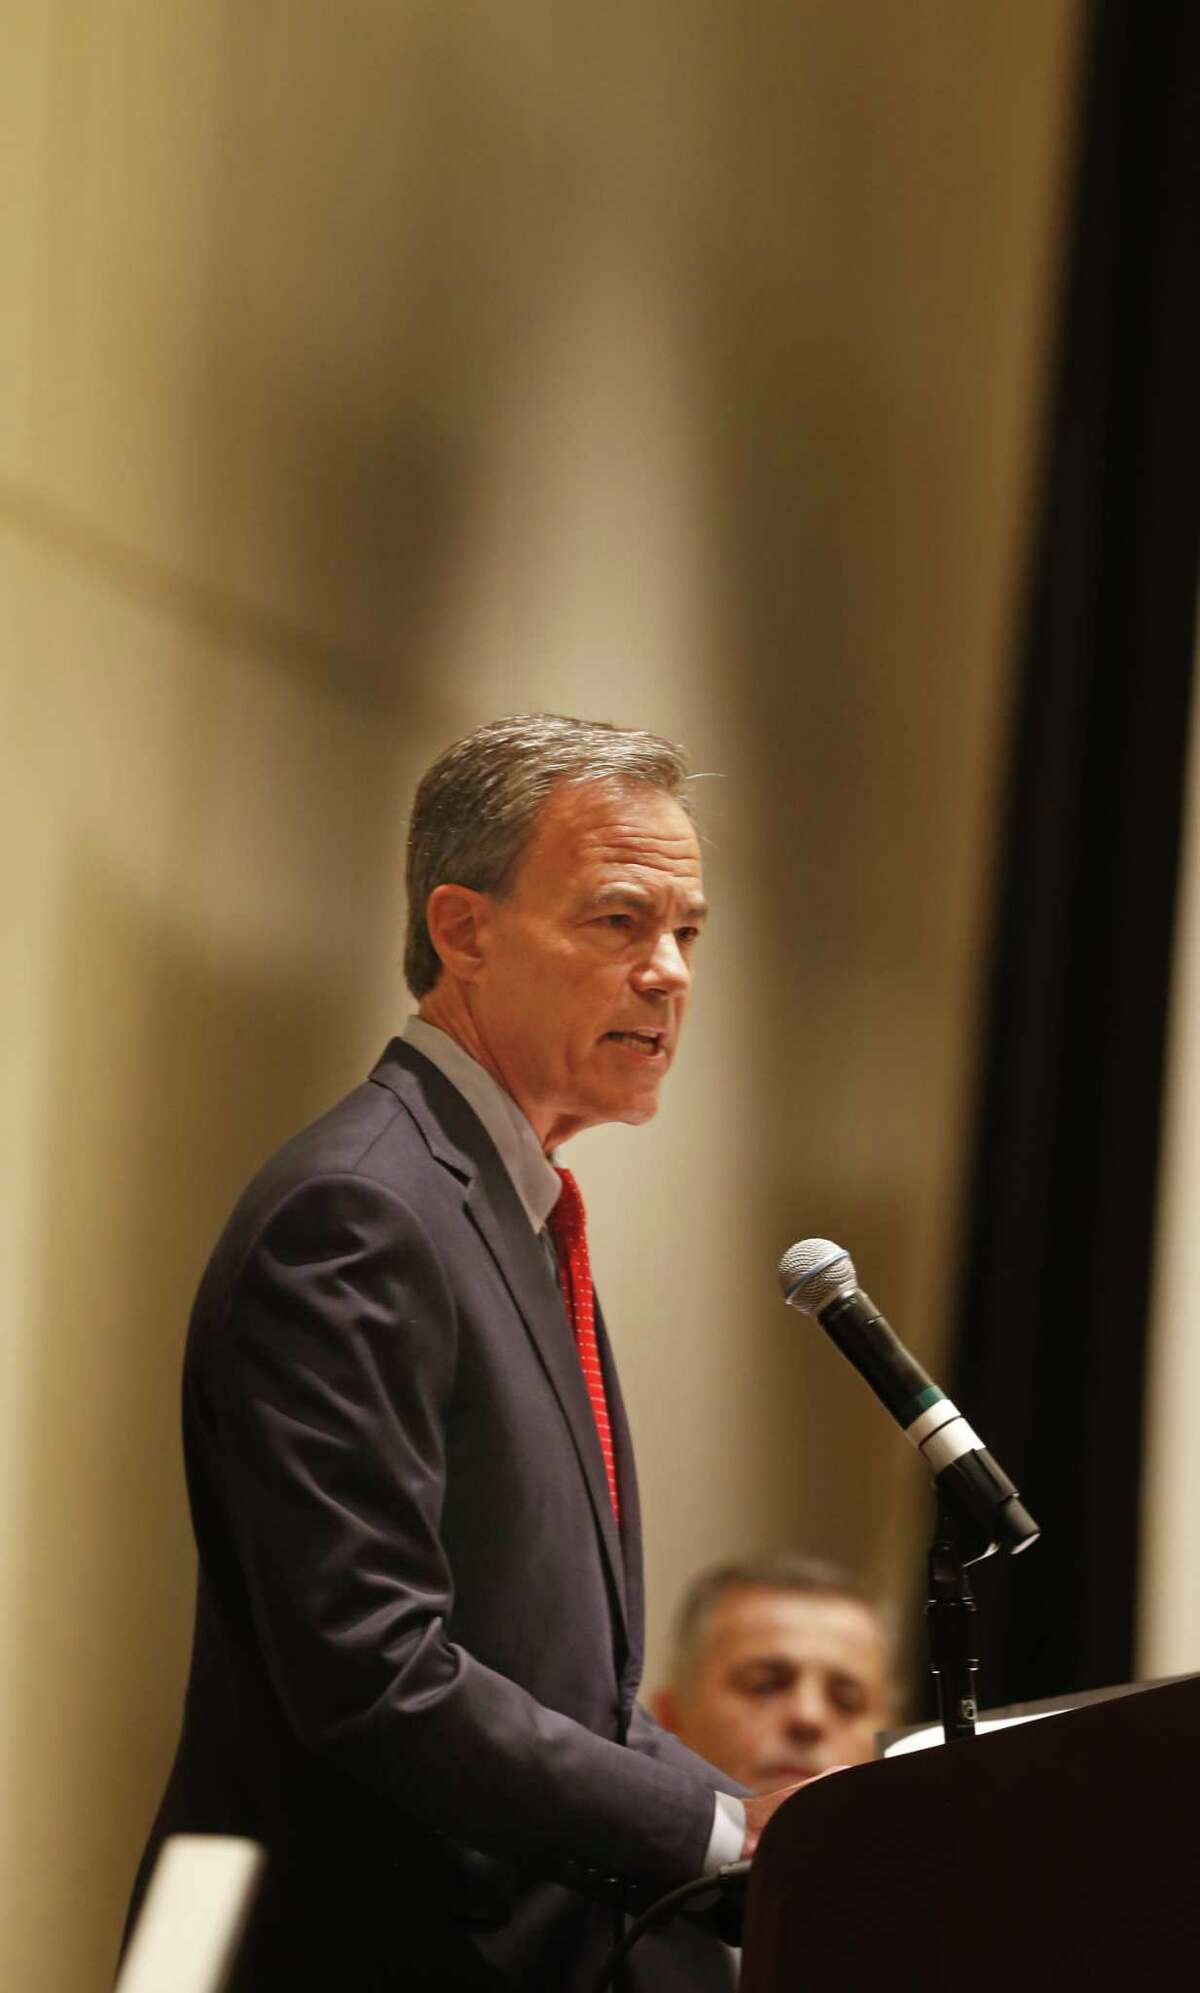 House Speaker Joe Straus address about 375 school board members and superintendents at a Texas Association of School Boards conference on Wednesday, June 14, at the San Antonio Marriott Rivercenter